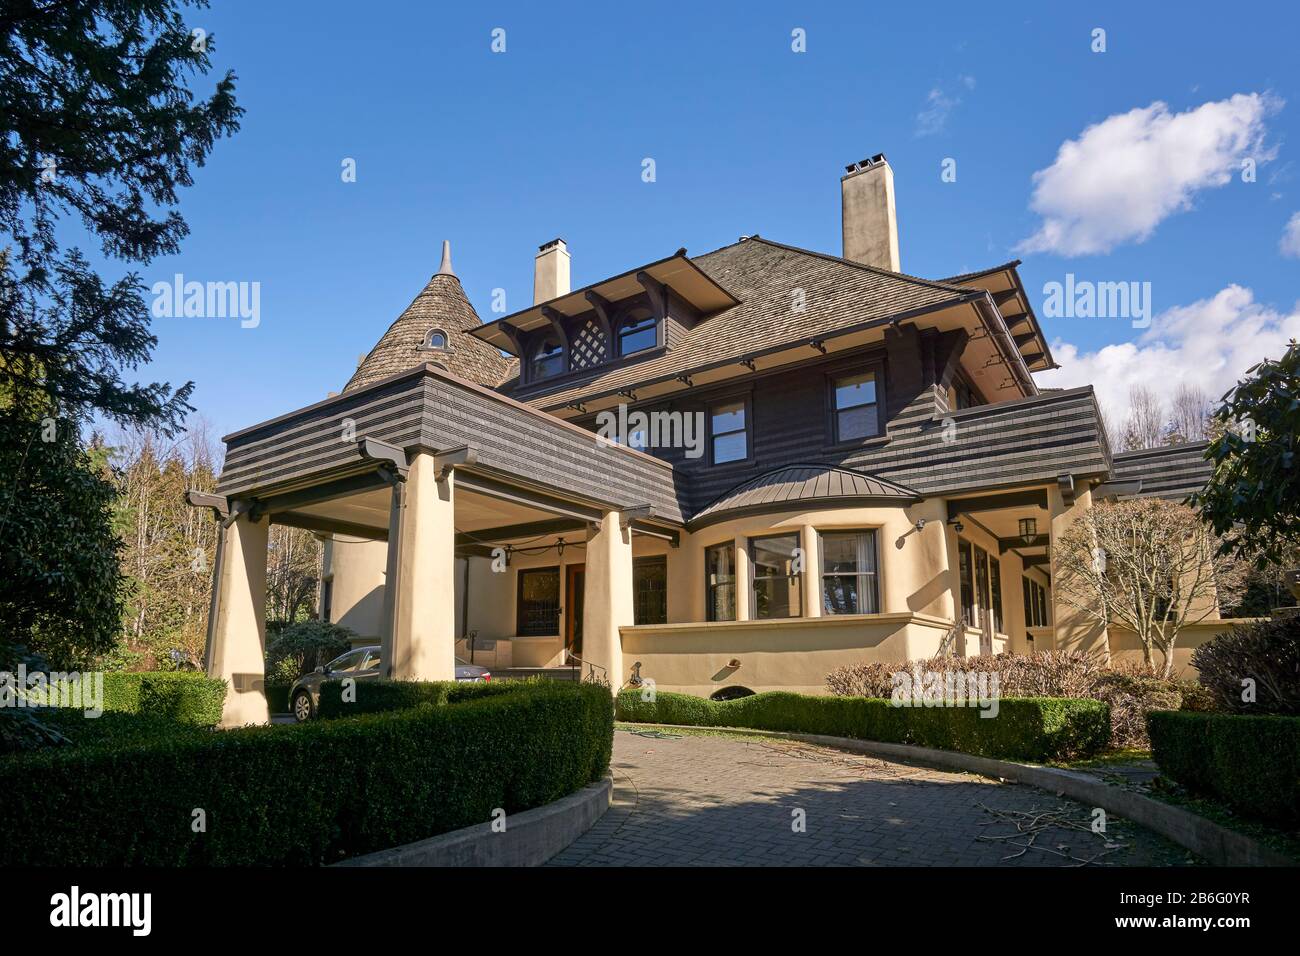 Greencroft mansion constructed in 1913 once owned by Eric Hamber, Shaughnessy Heights, Vancouver, British Columbia Canada Stock Photo